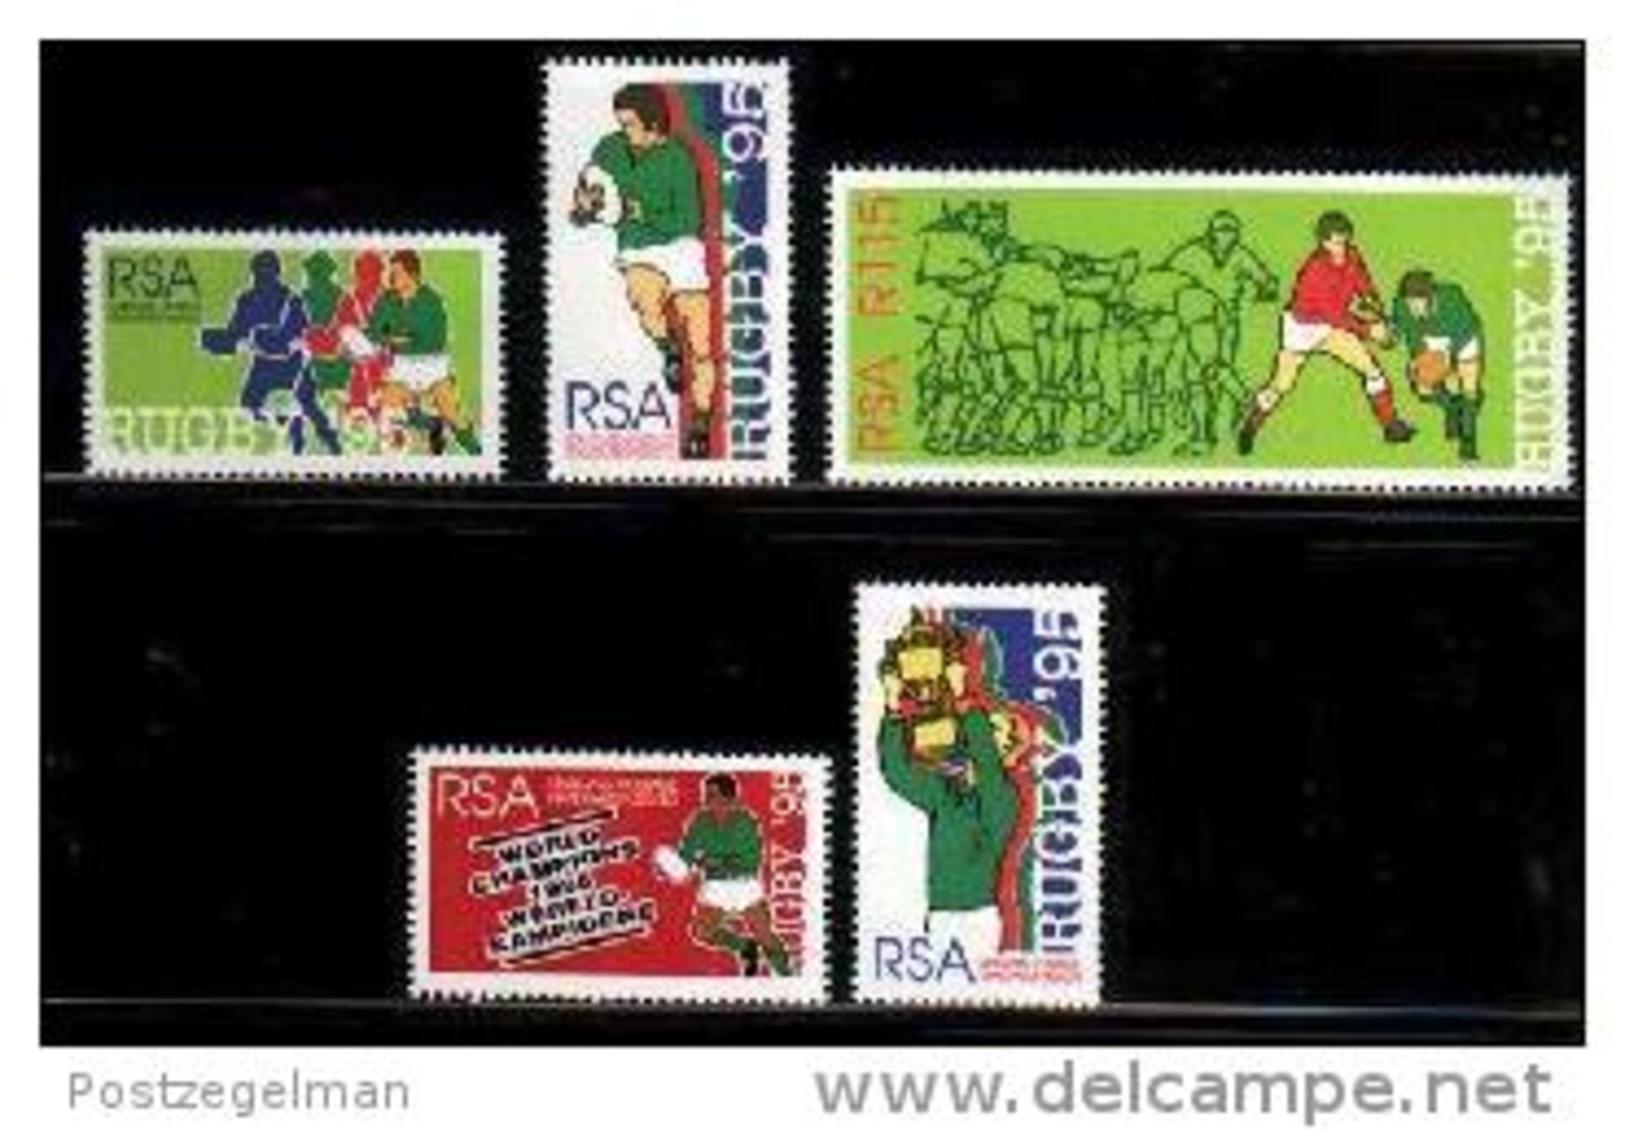 REPUBLIC OF SOUTH AFRICA, 1995, MNH Stamp(s) Rugby/champions,   Nr(s.) 956-958, 960-961 - Unused Stamps